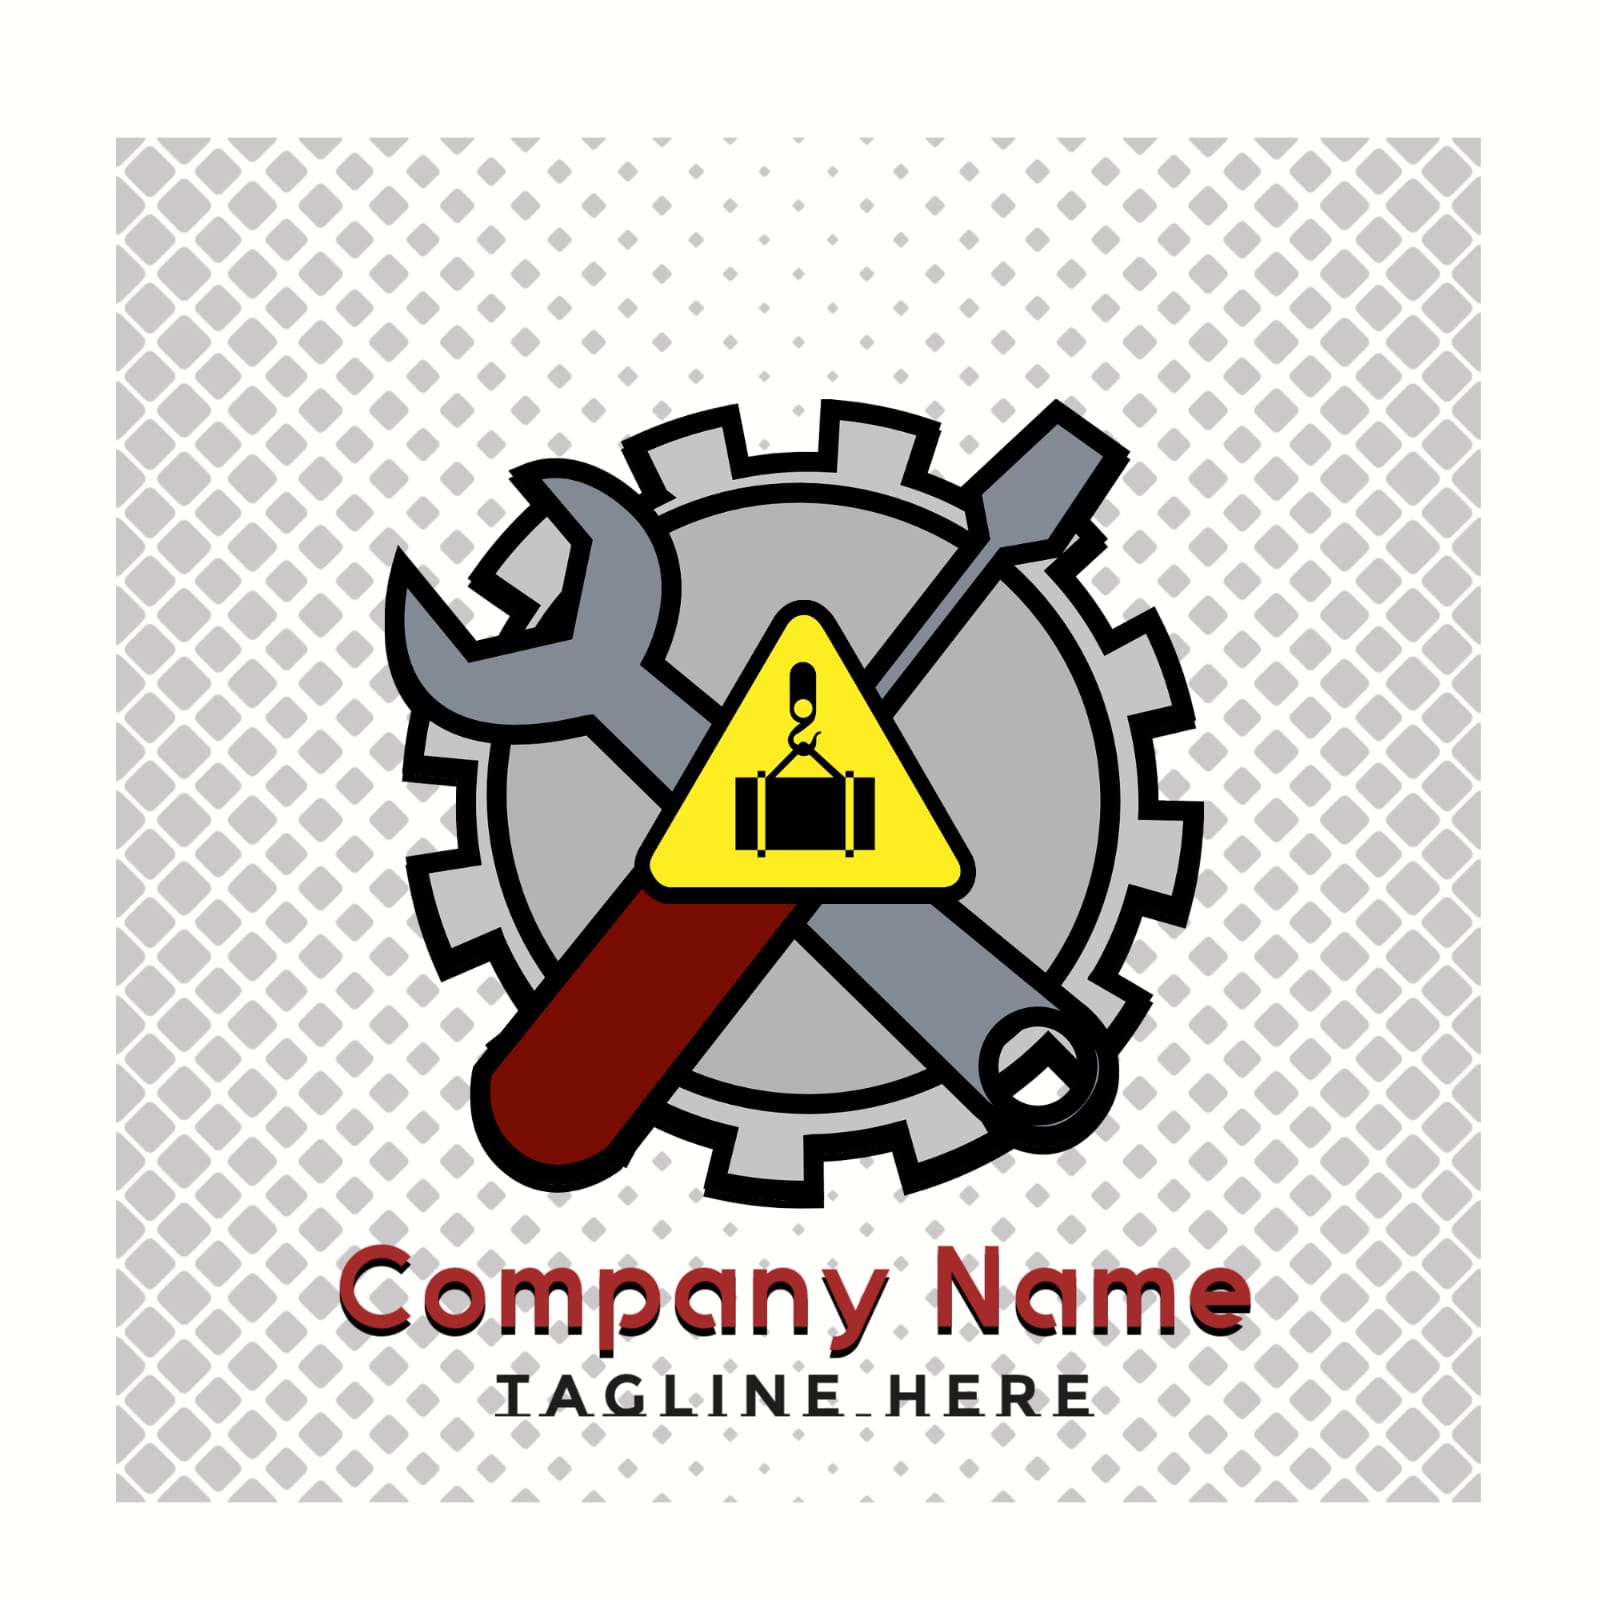 Wrench and a wrench with the words company name tagline here.